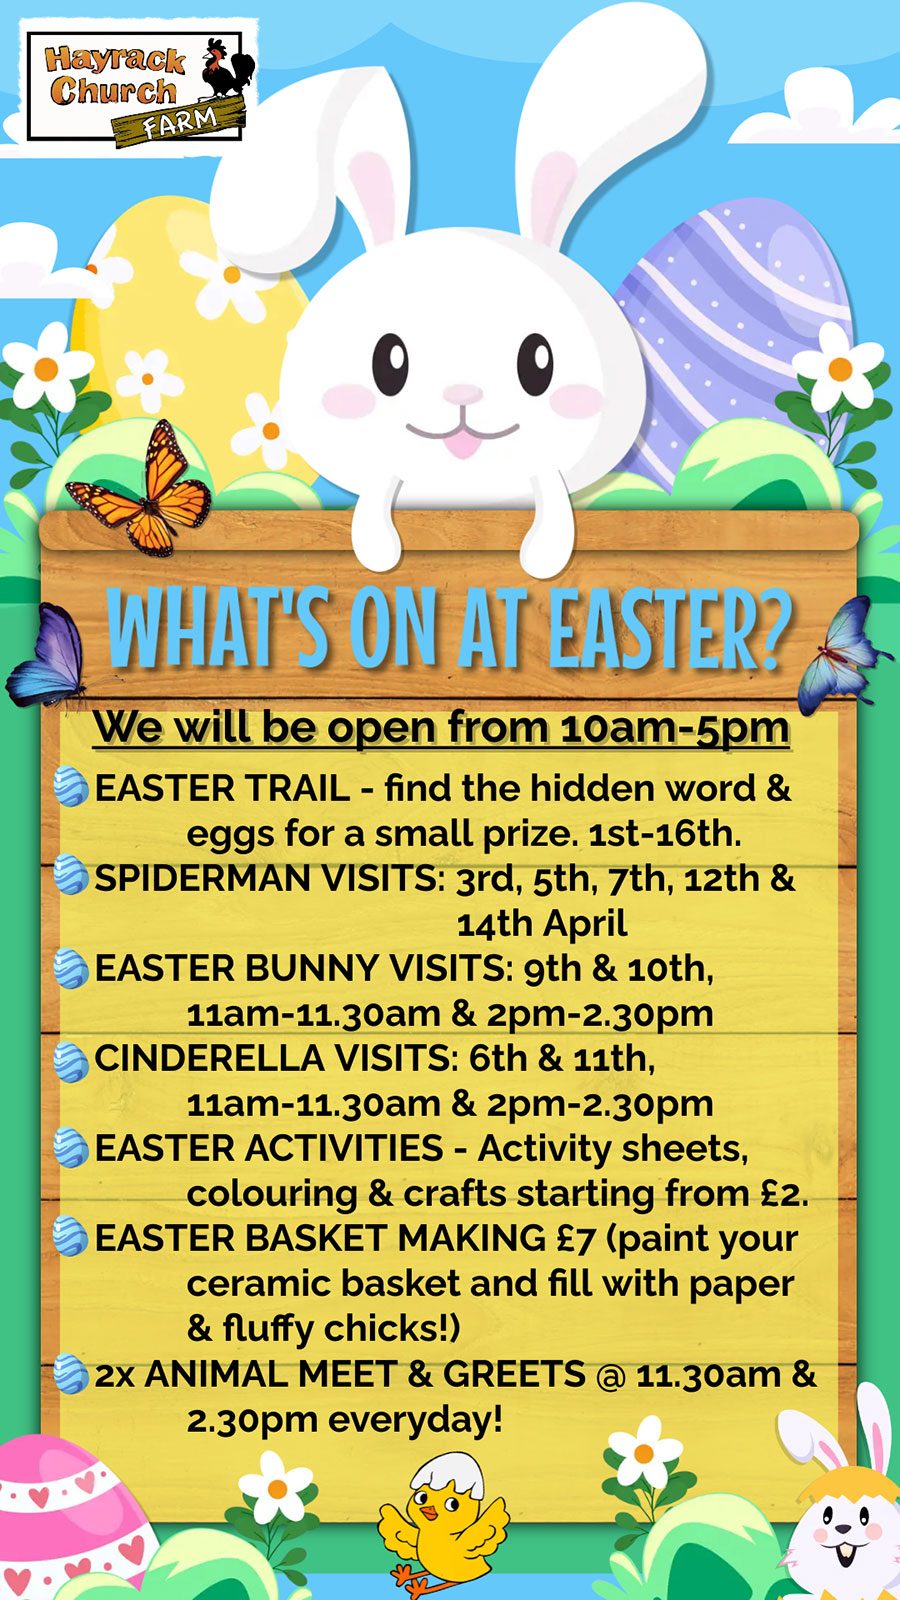 Easter Activities at the Hayrack Farm Park